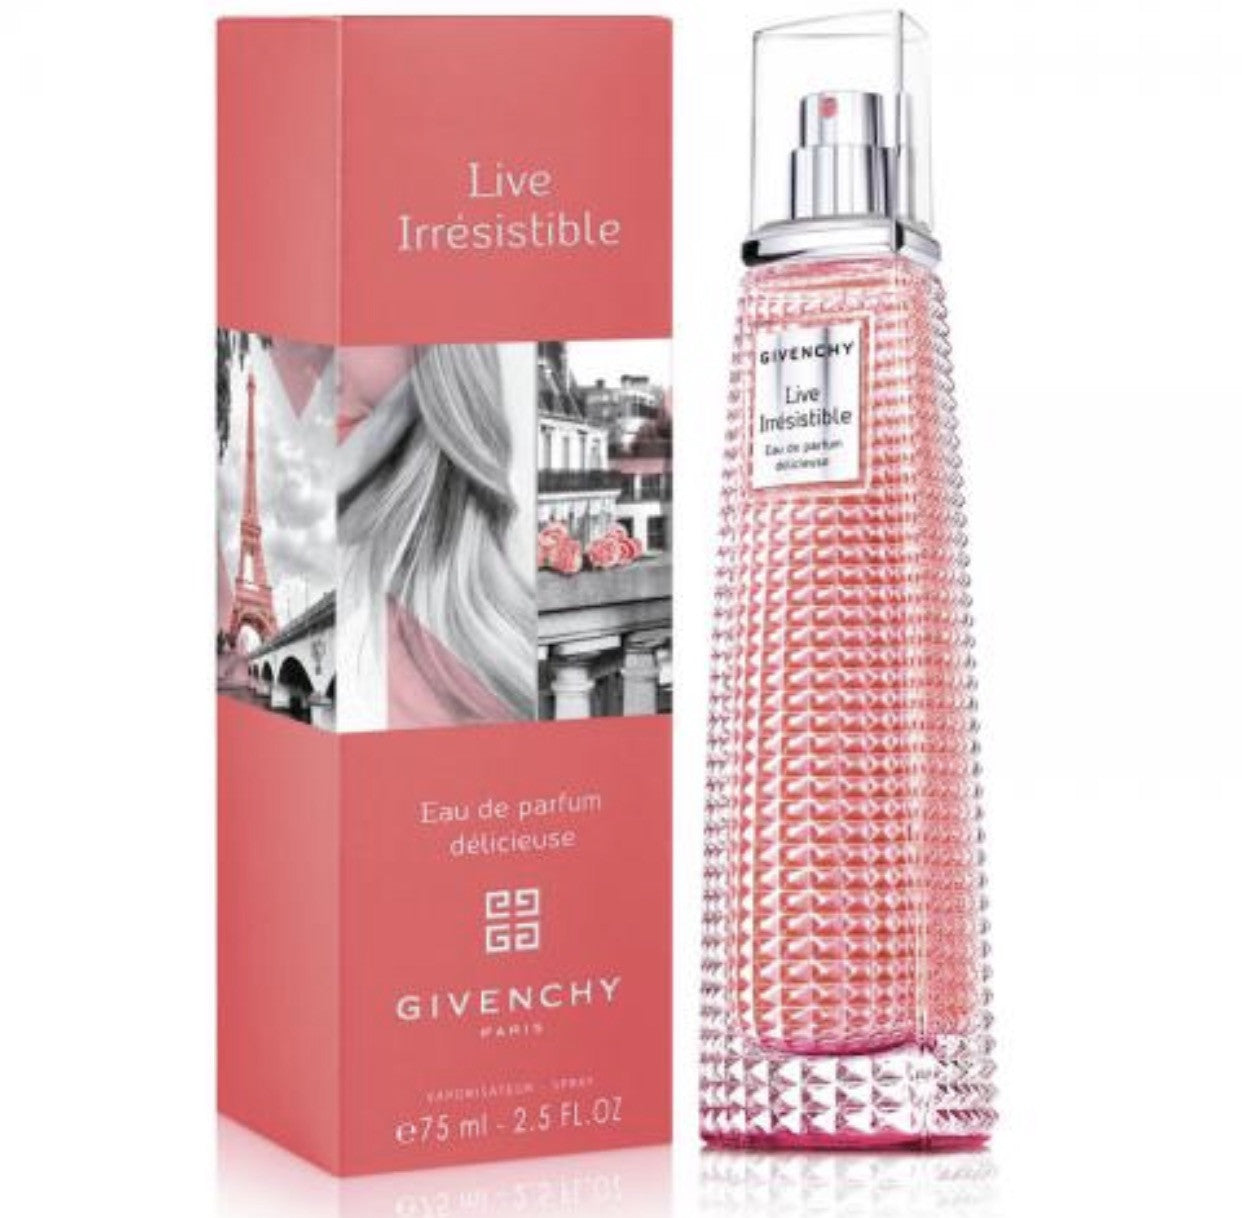 Givenchy Live Irresistible Delicieuse 2 